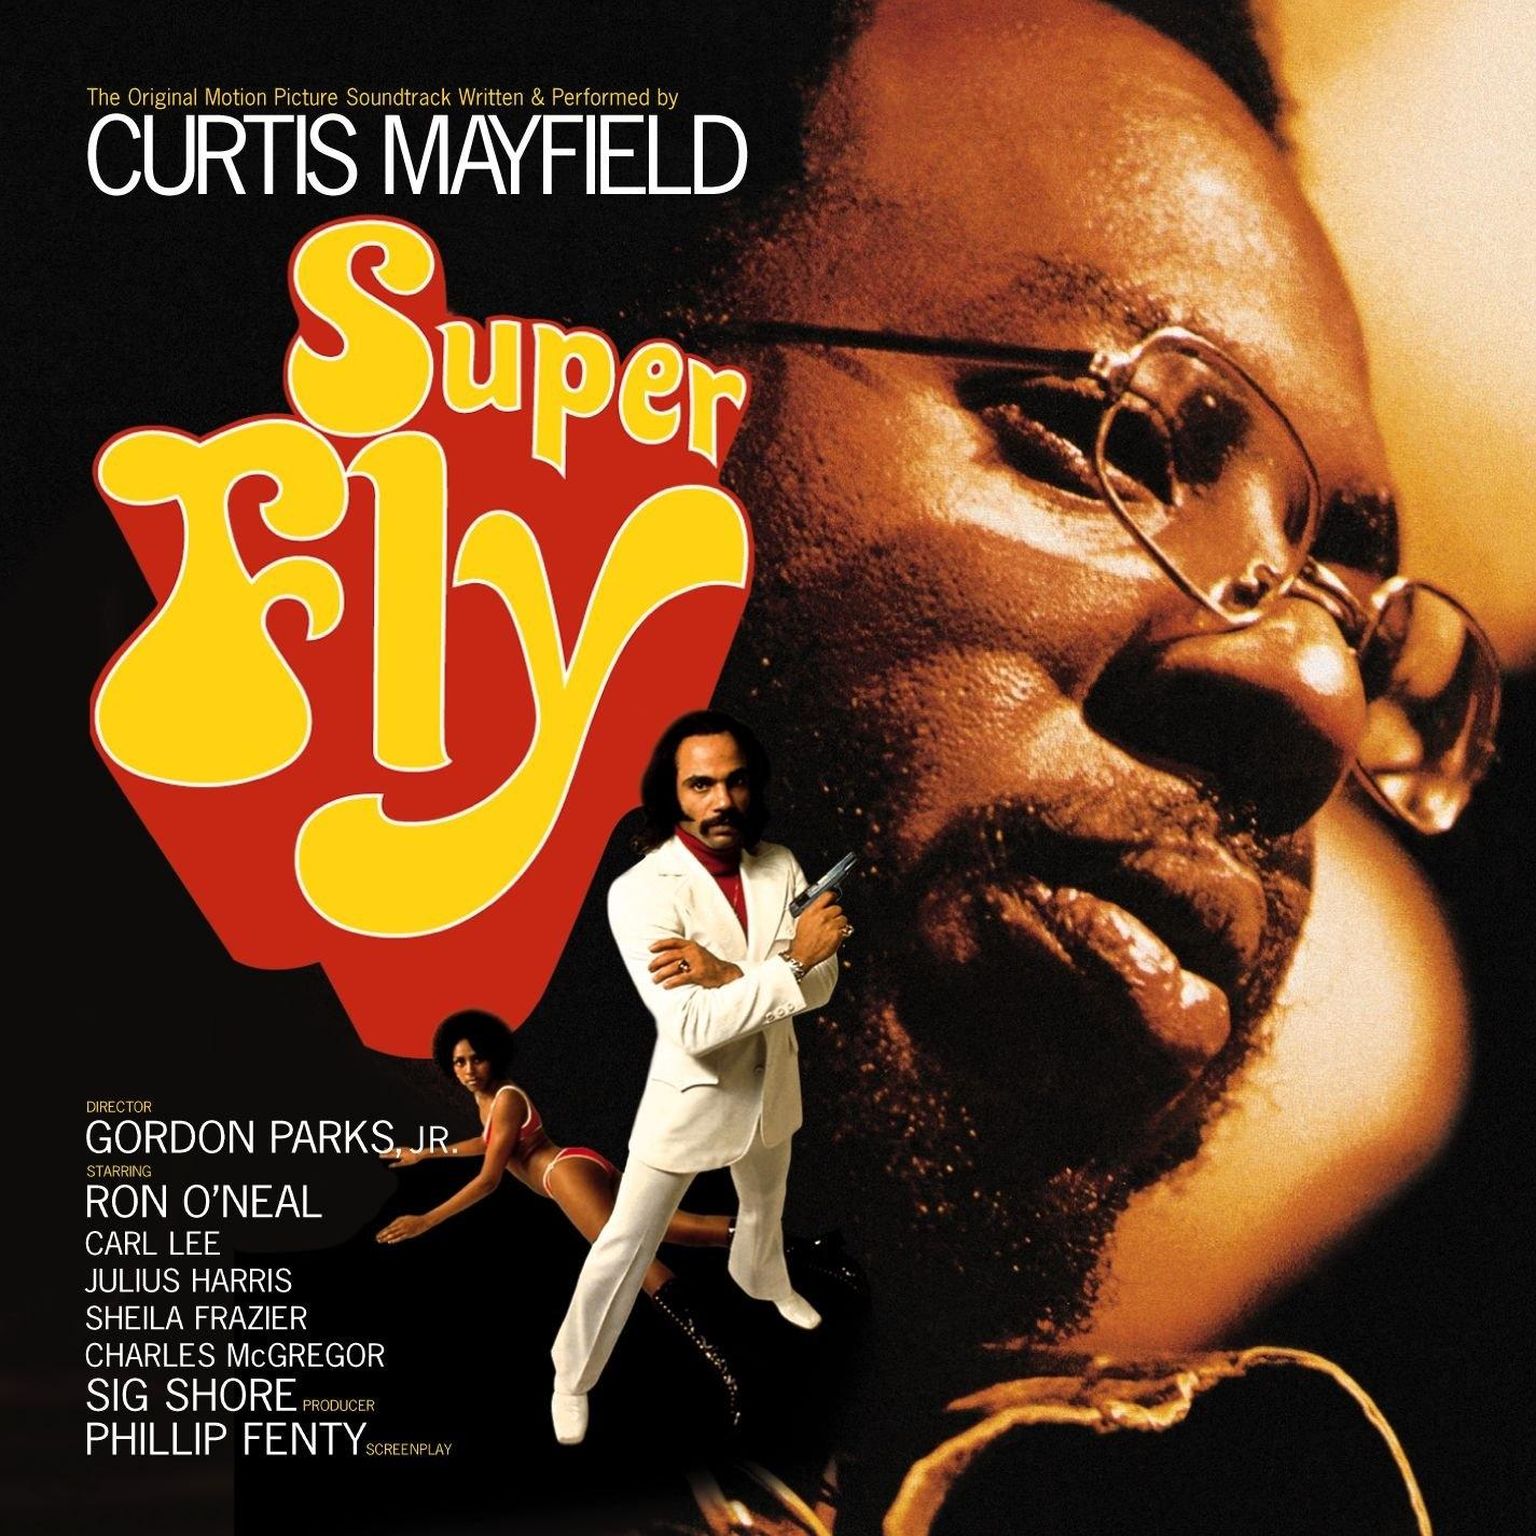 Curtis Mayfield "Superfly"